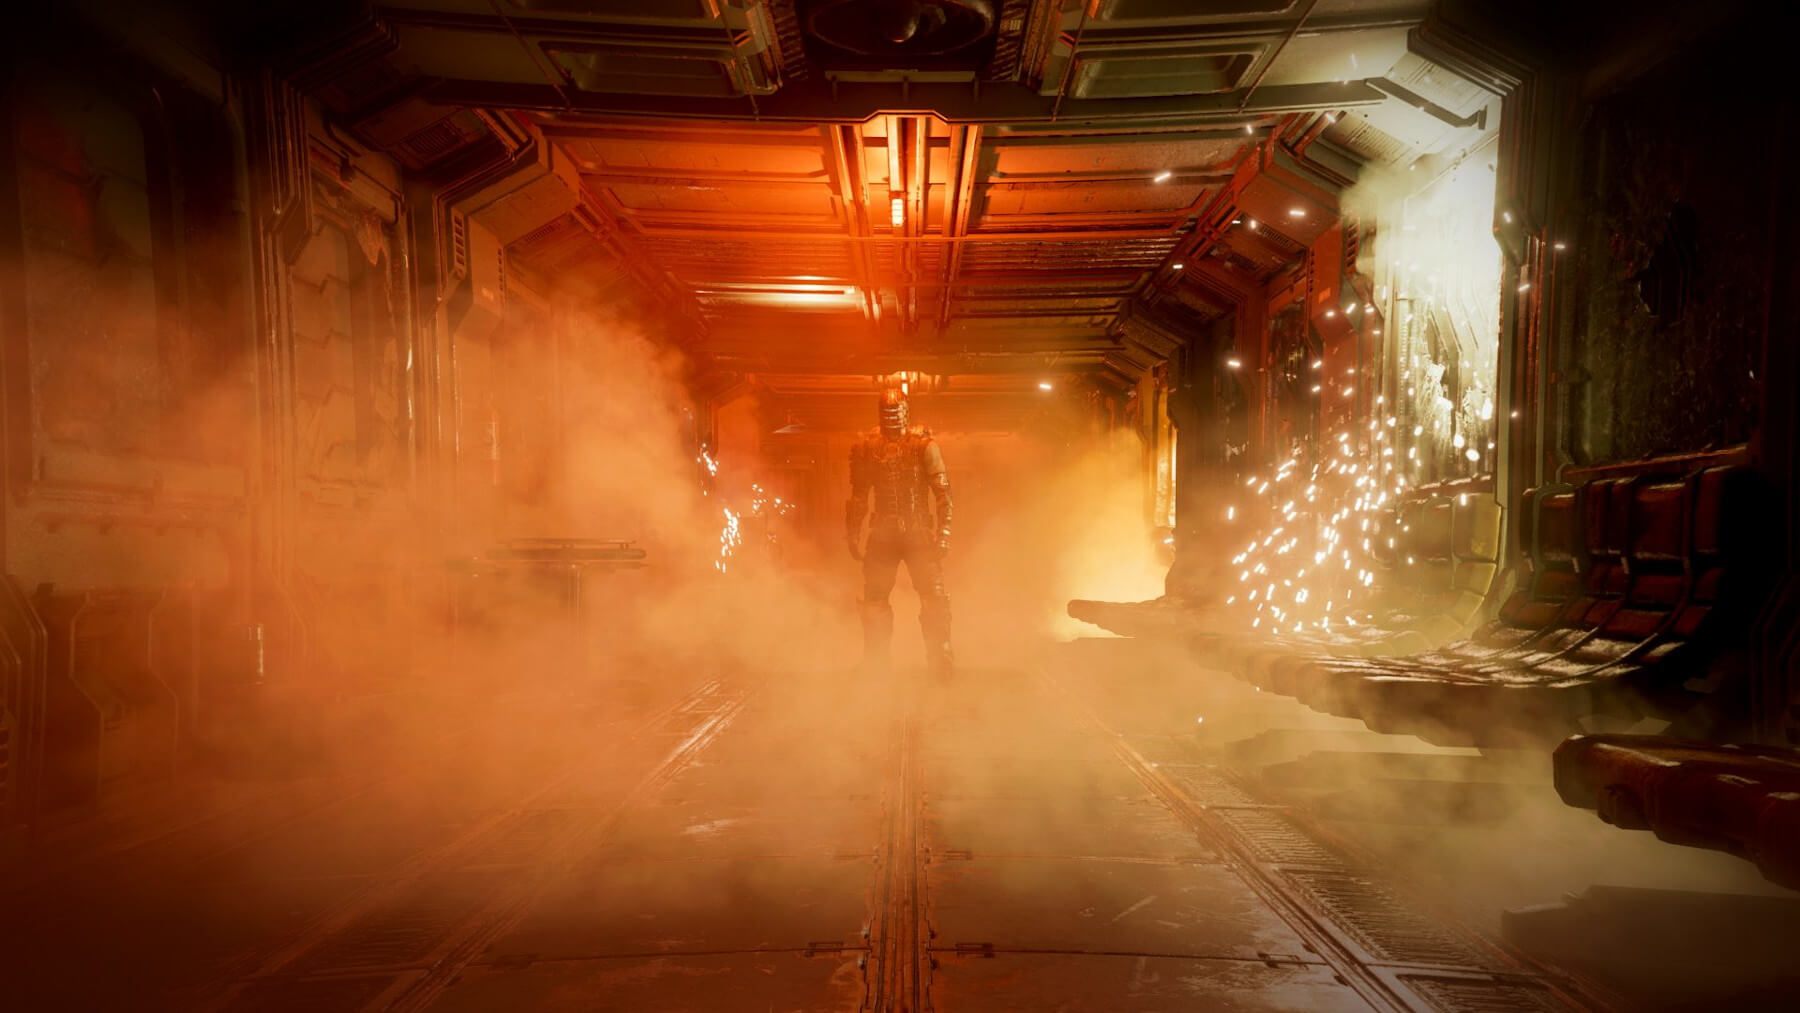 Dead Space protagonist stands in a spaceship corridor flooded with fog and enveloped in orange, reddish light.